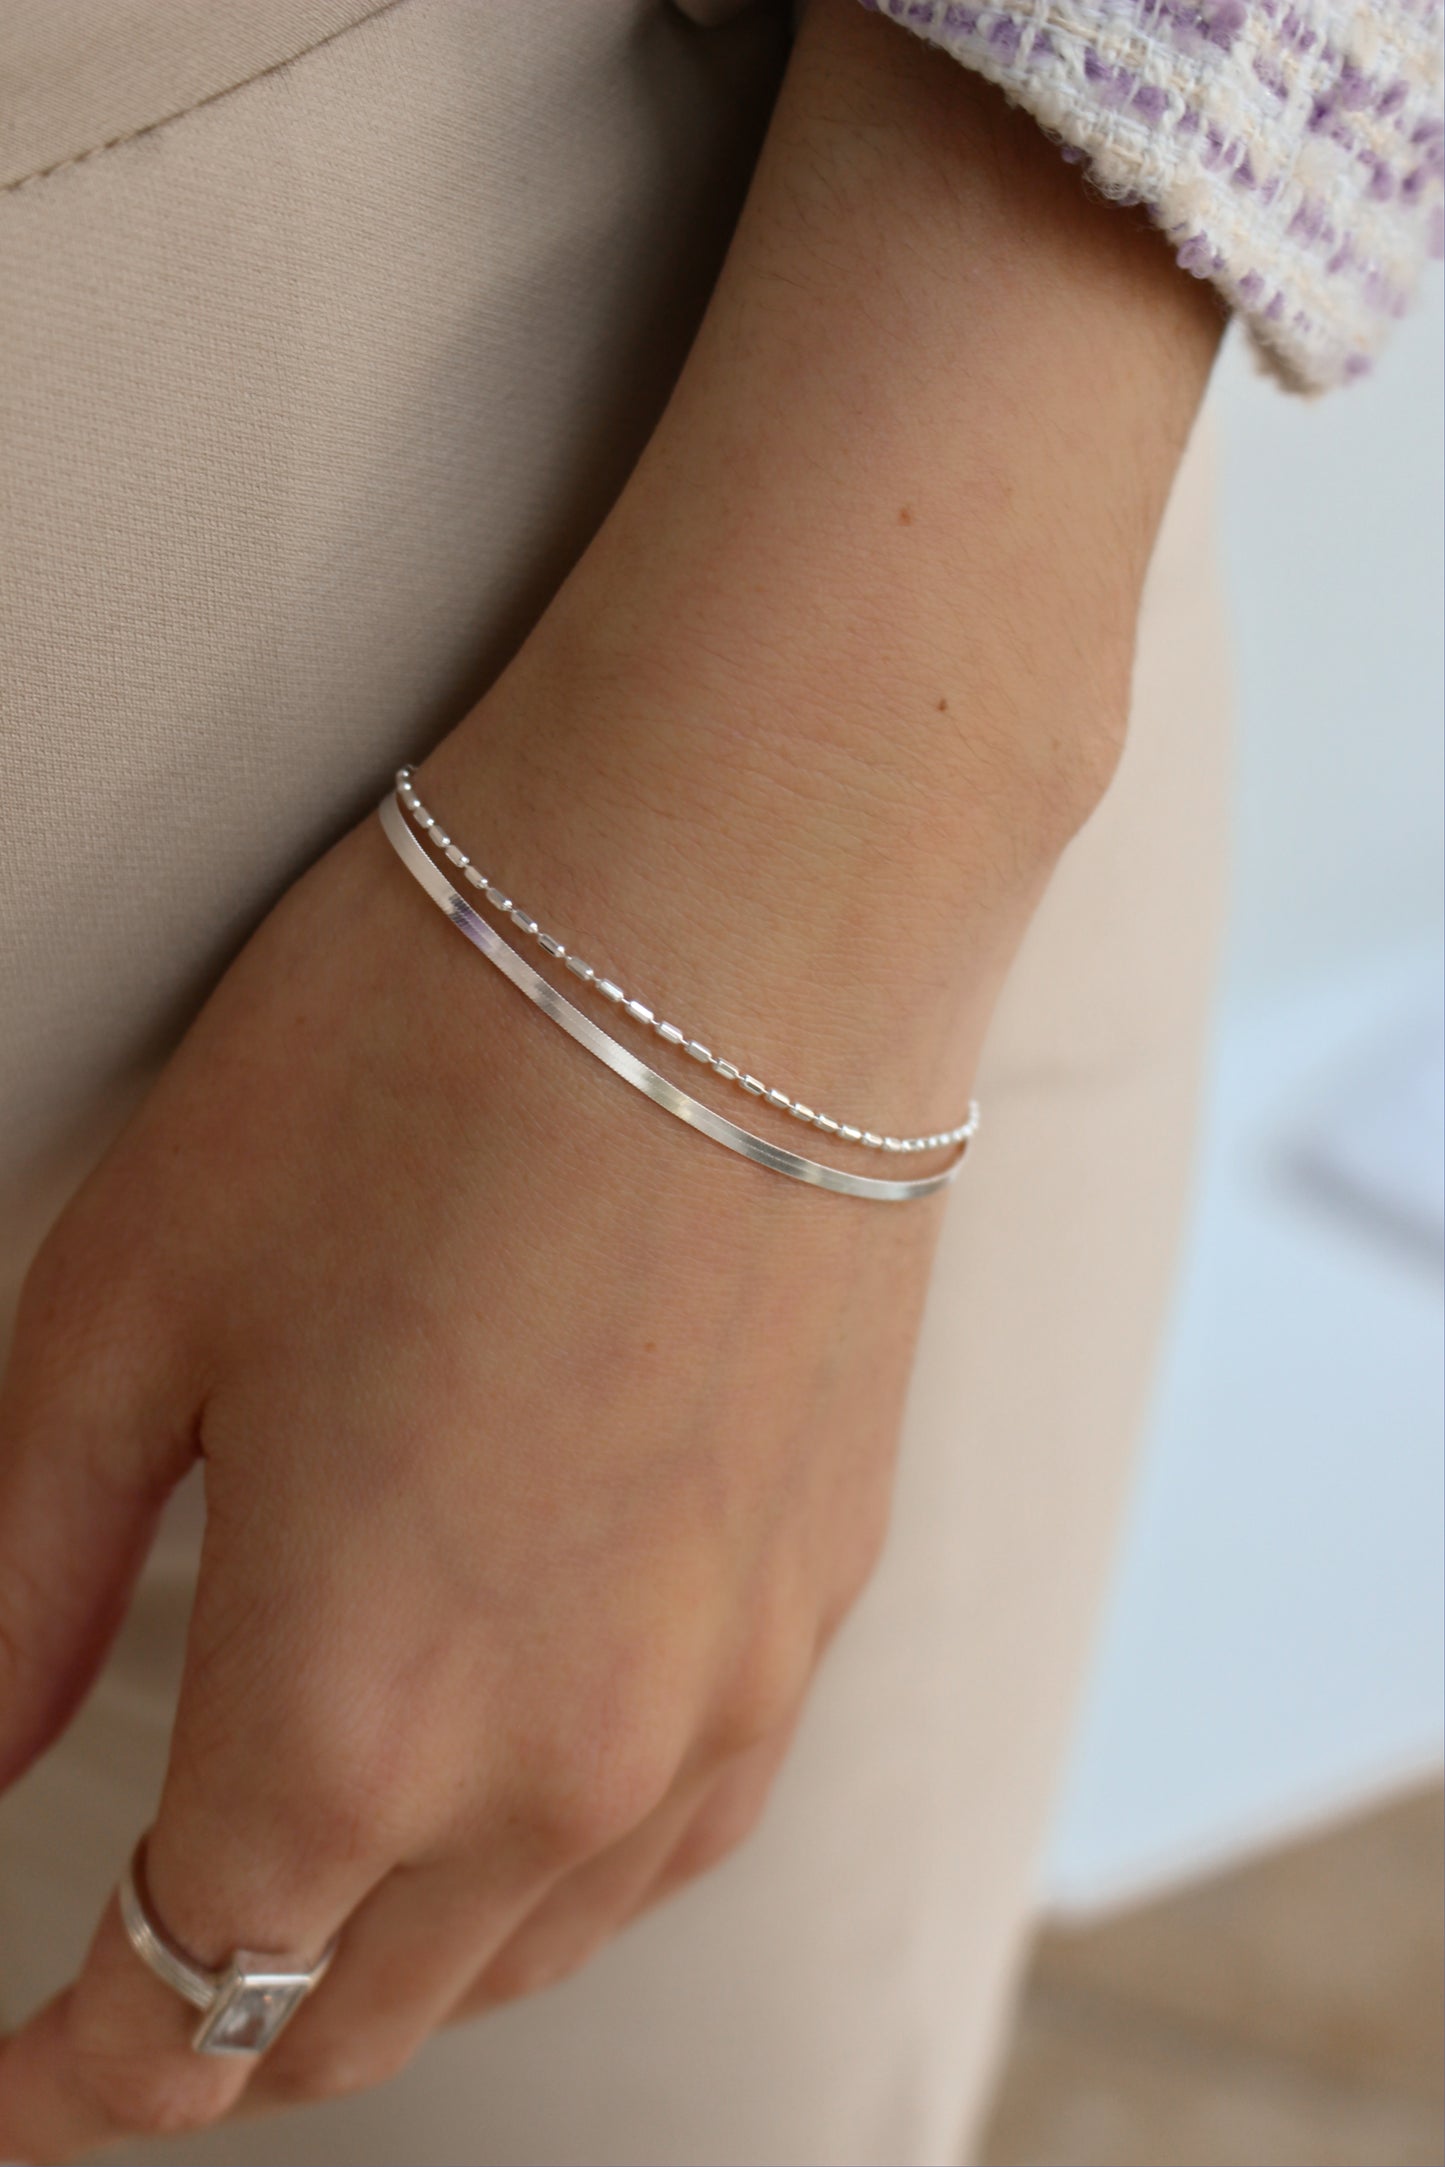 CANEO - 100% 925 Sterling Silver Double Layer Bracelet ∙ Water Resistant ∙ Herringbone Bracelet ∙ Silver Filled Beaded Chain